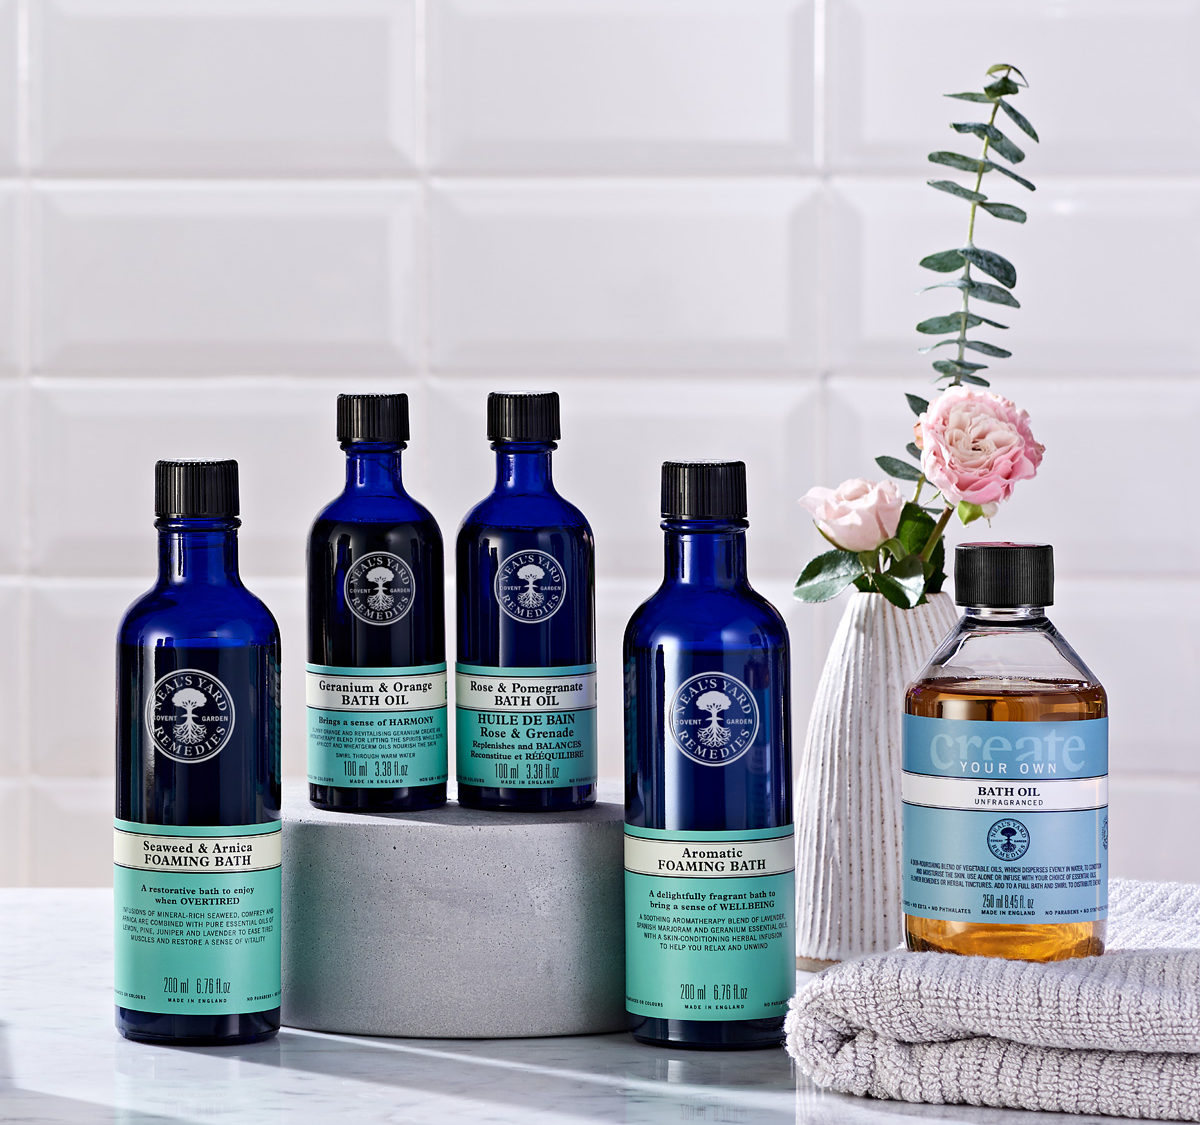 Neal’s Yard extends partnership with Wincanton